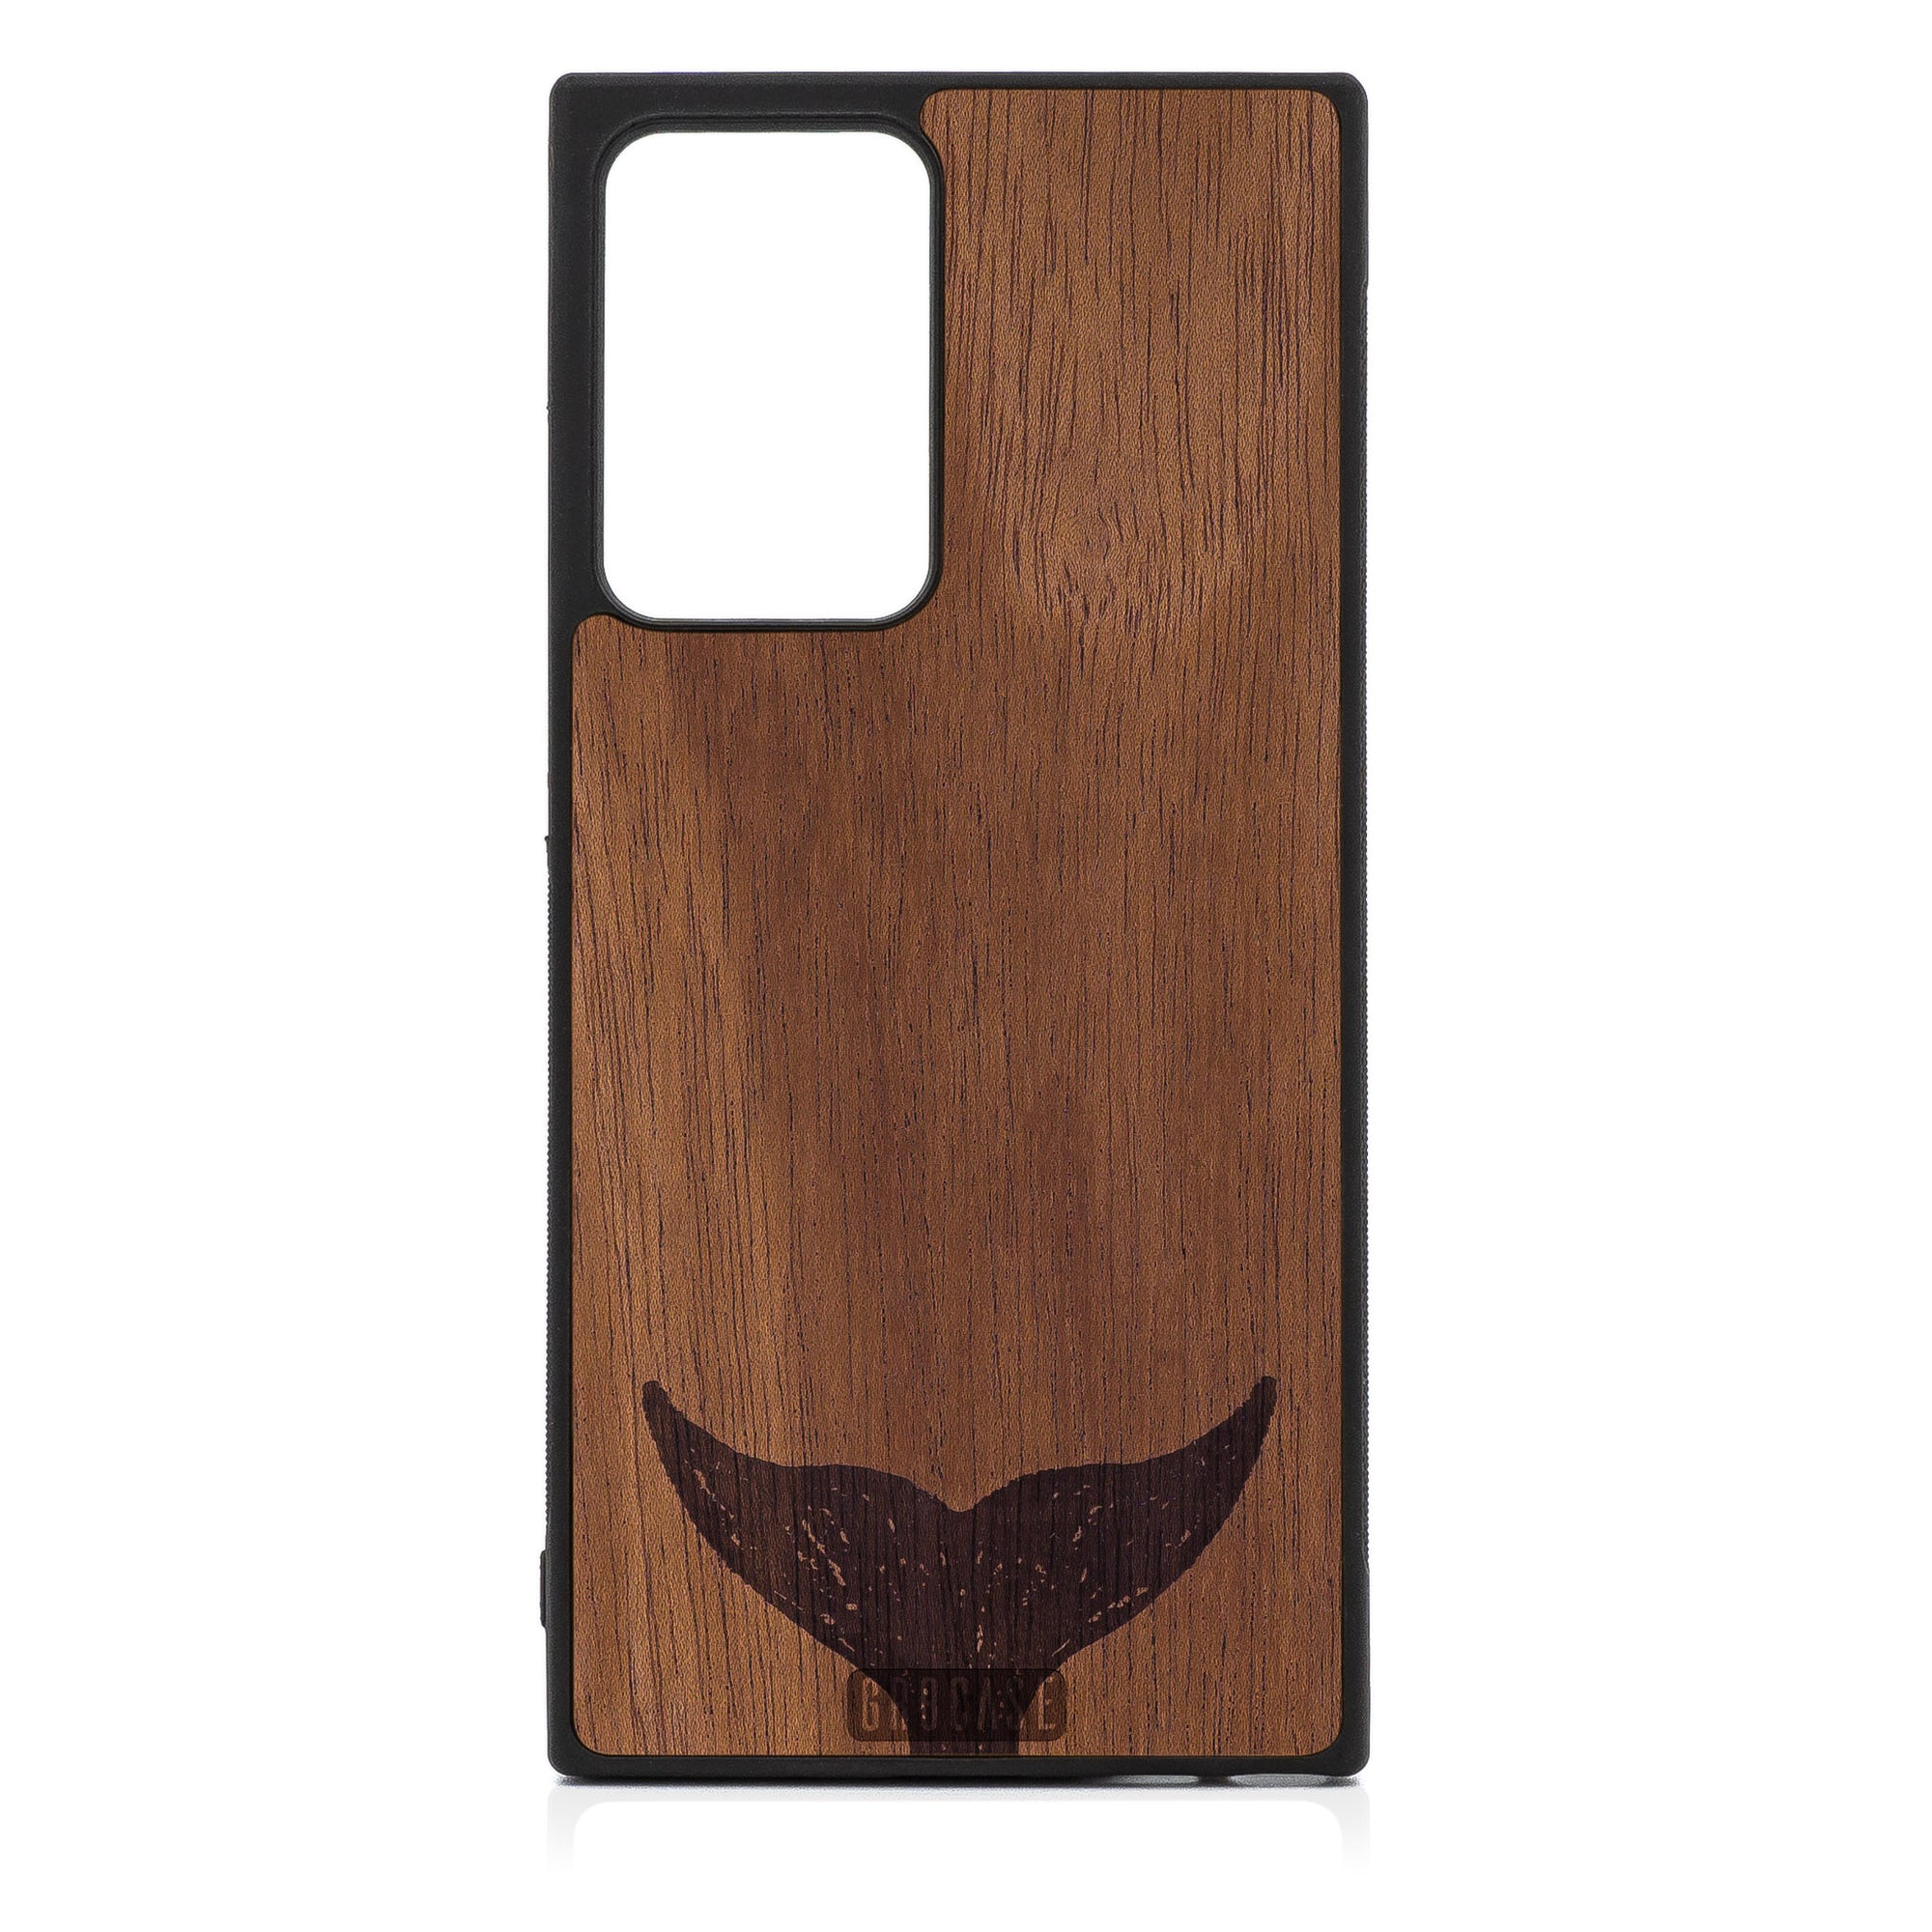 Whale Tail Design Wood Case For Samsung Galaxy Note 20 Ultra